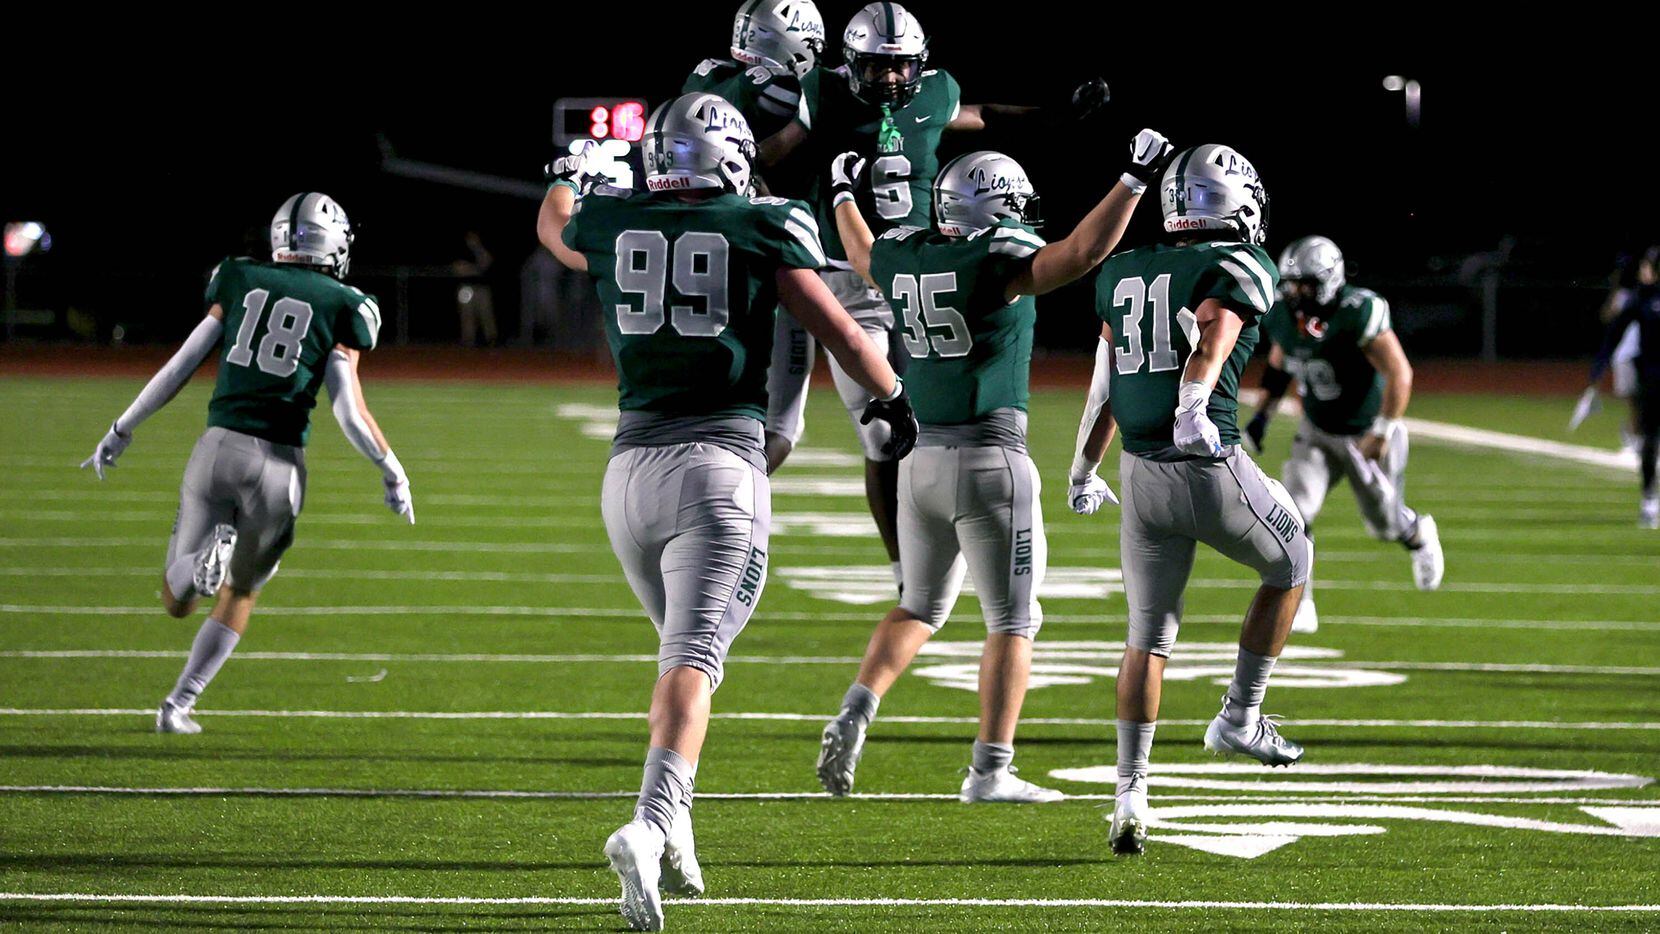 Frisco Reedy celebrates its victory over Frisco Lone Star, 13-7 in a high school football...